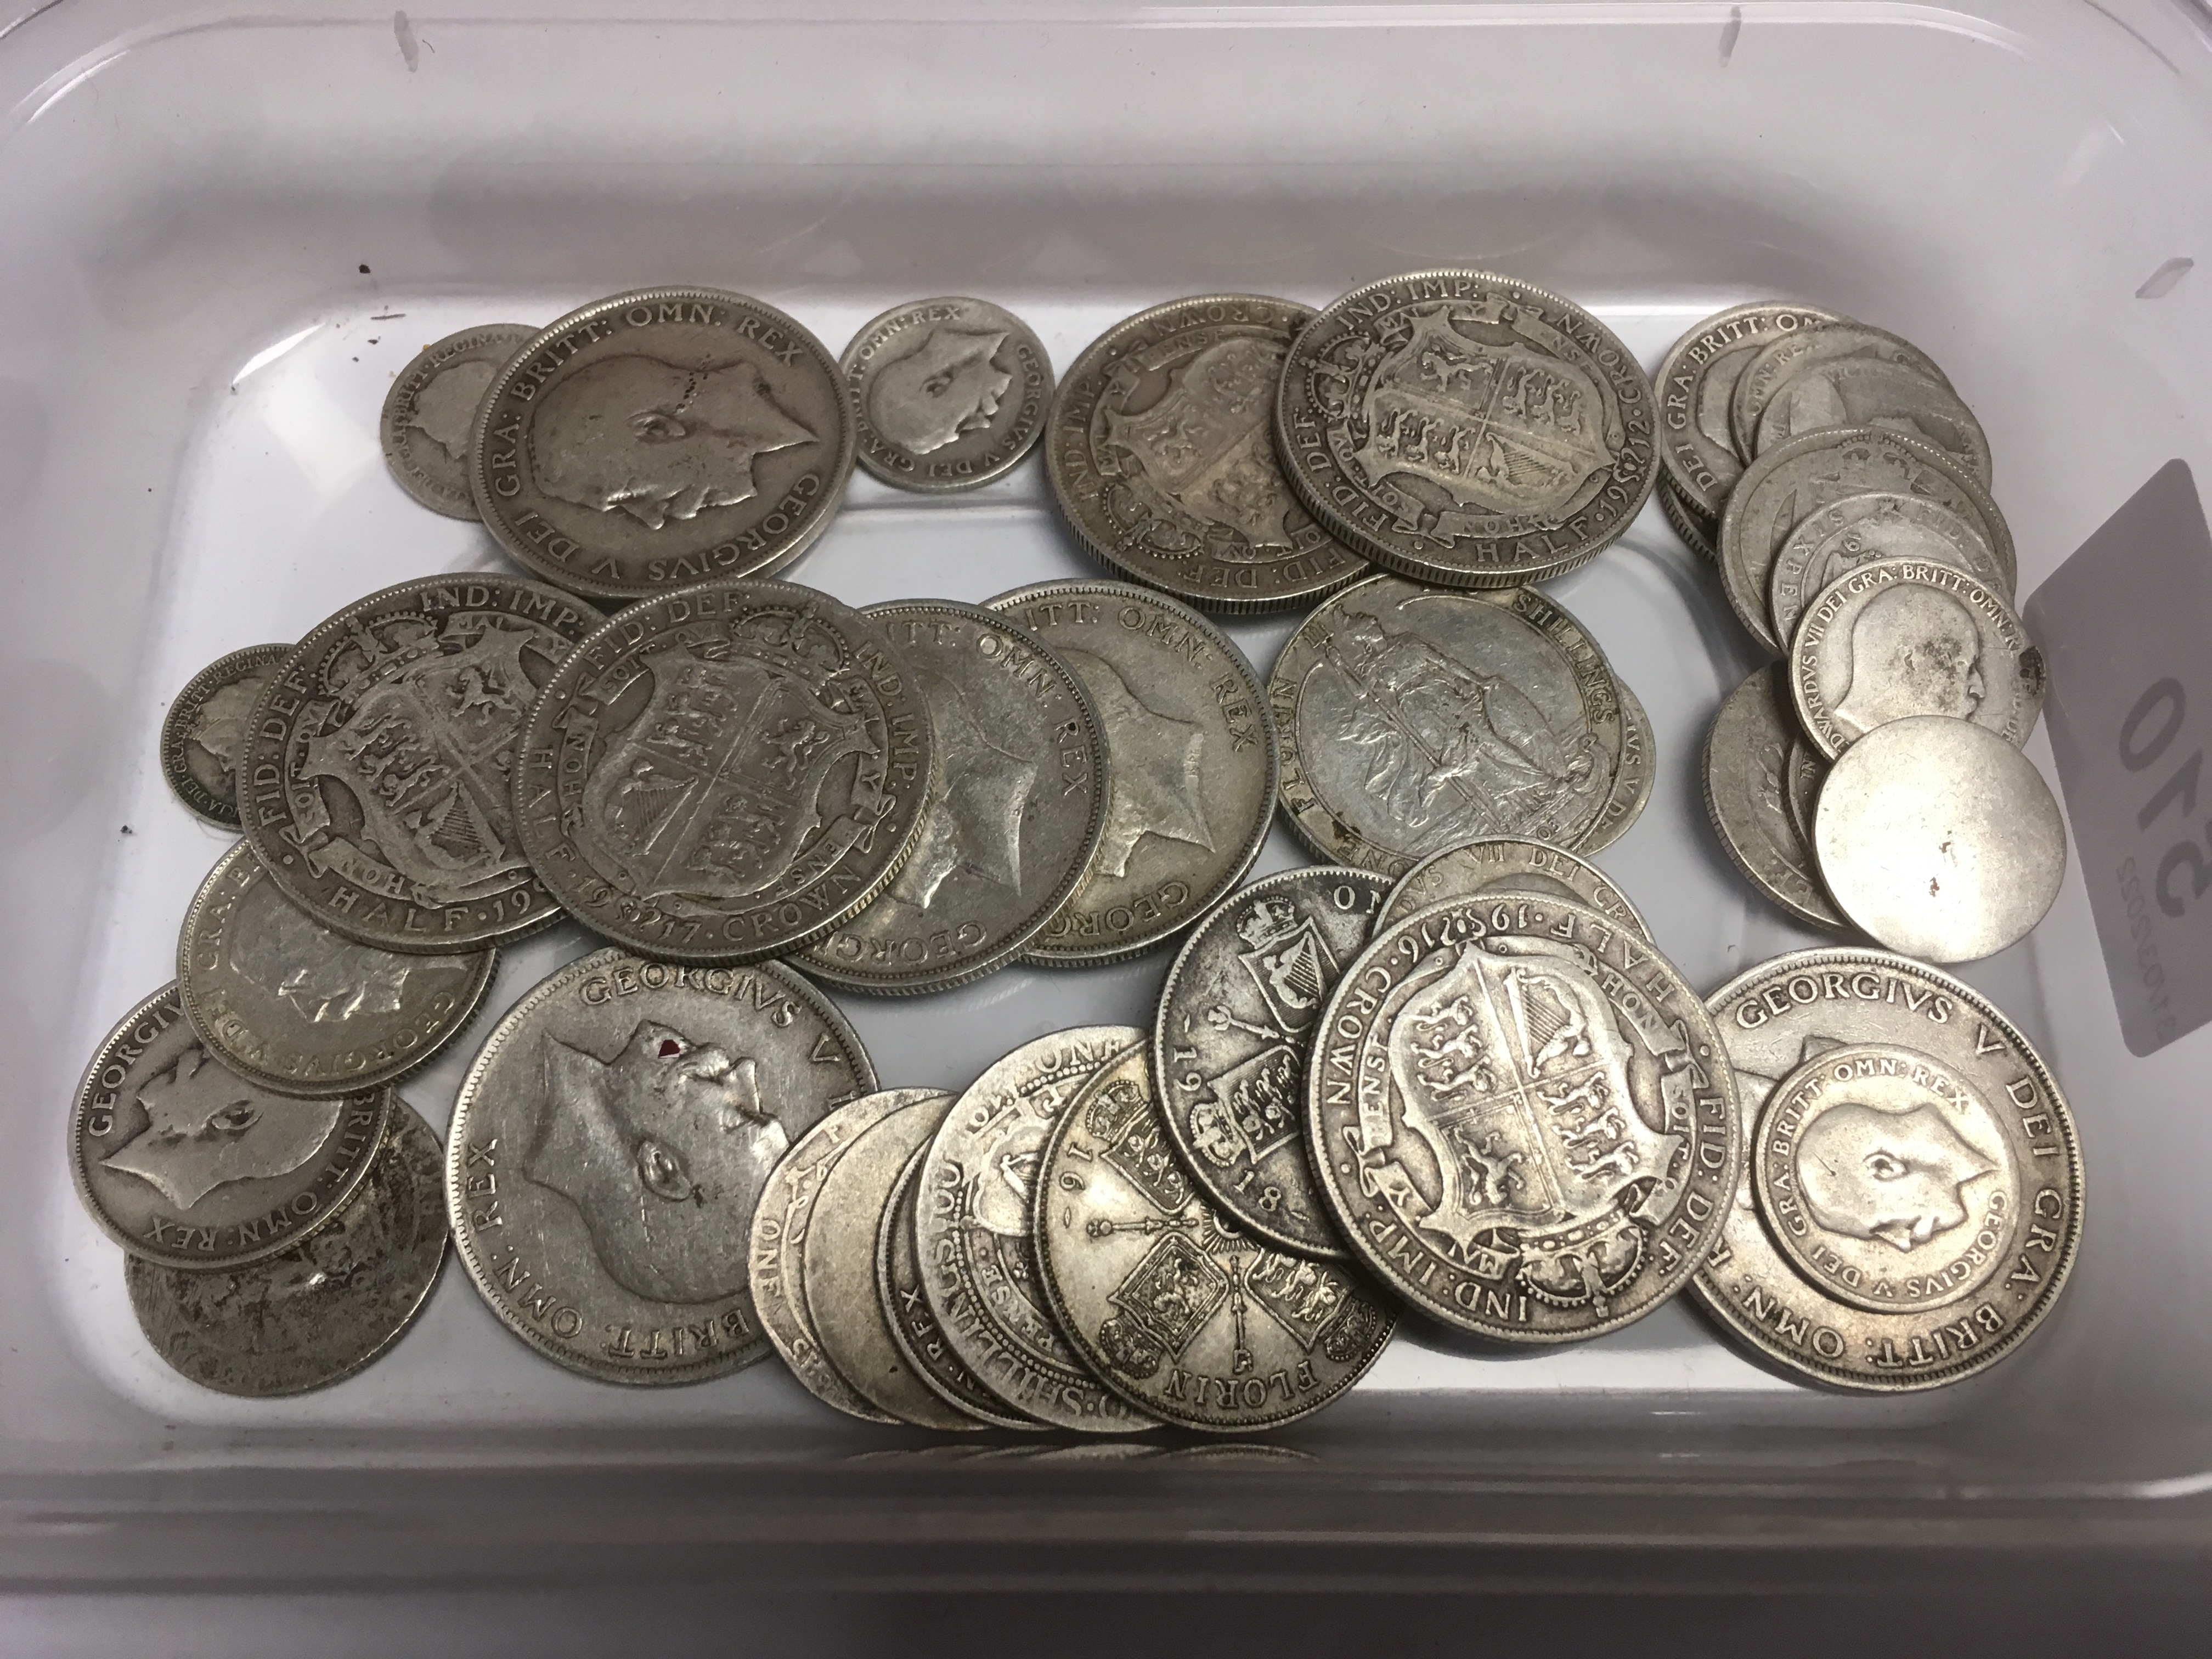 TUB OF PRE 1920 UK SILVER COINS INCLUDING 1903 FLORIN, 1906 SHILLING ETC, FACE APPROX £2.40. - Image 2 of 5